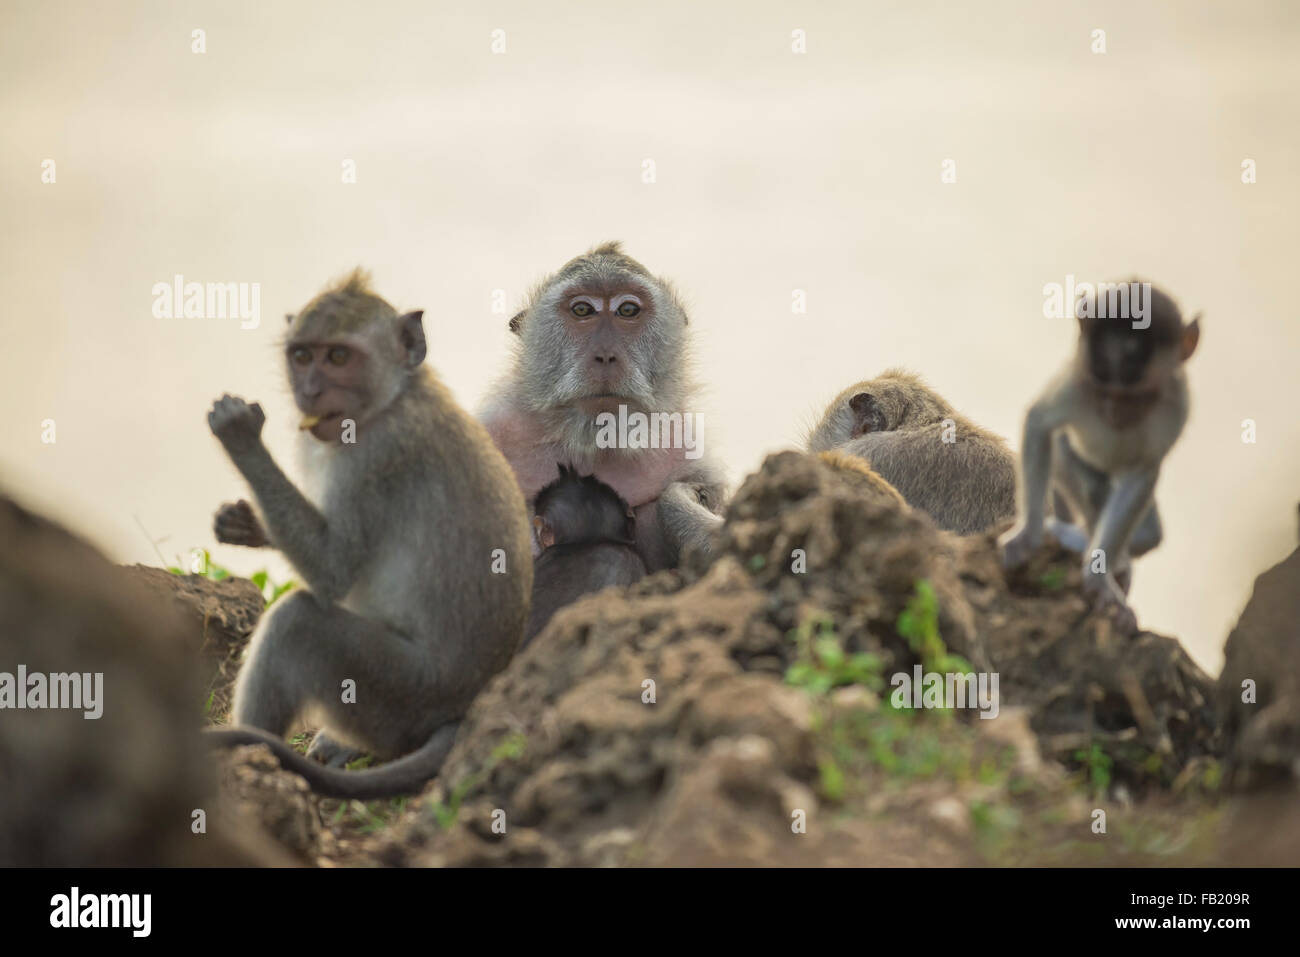 Family of wild monkeys in natural habitat, mom with baby and ape eating. Wildlife conservation campaign. Stock Photo